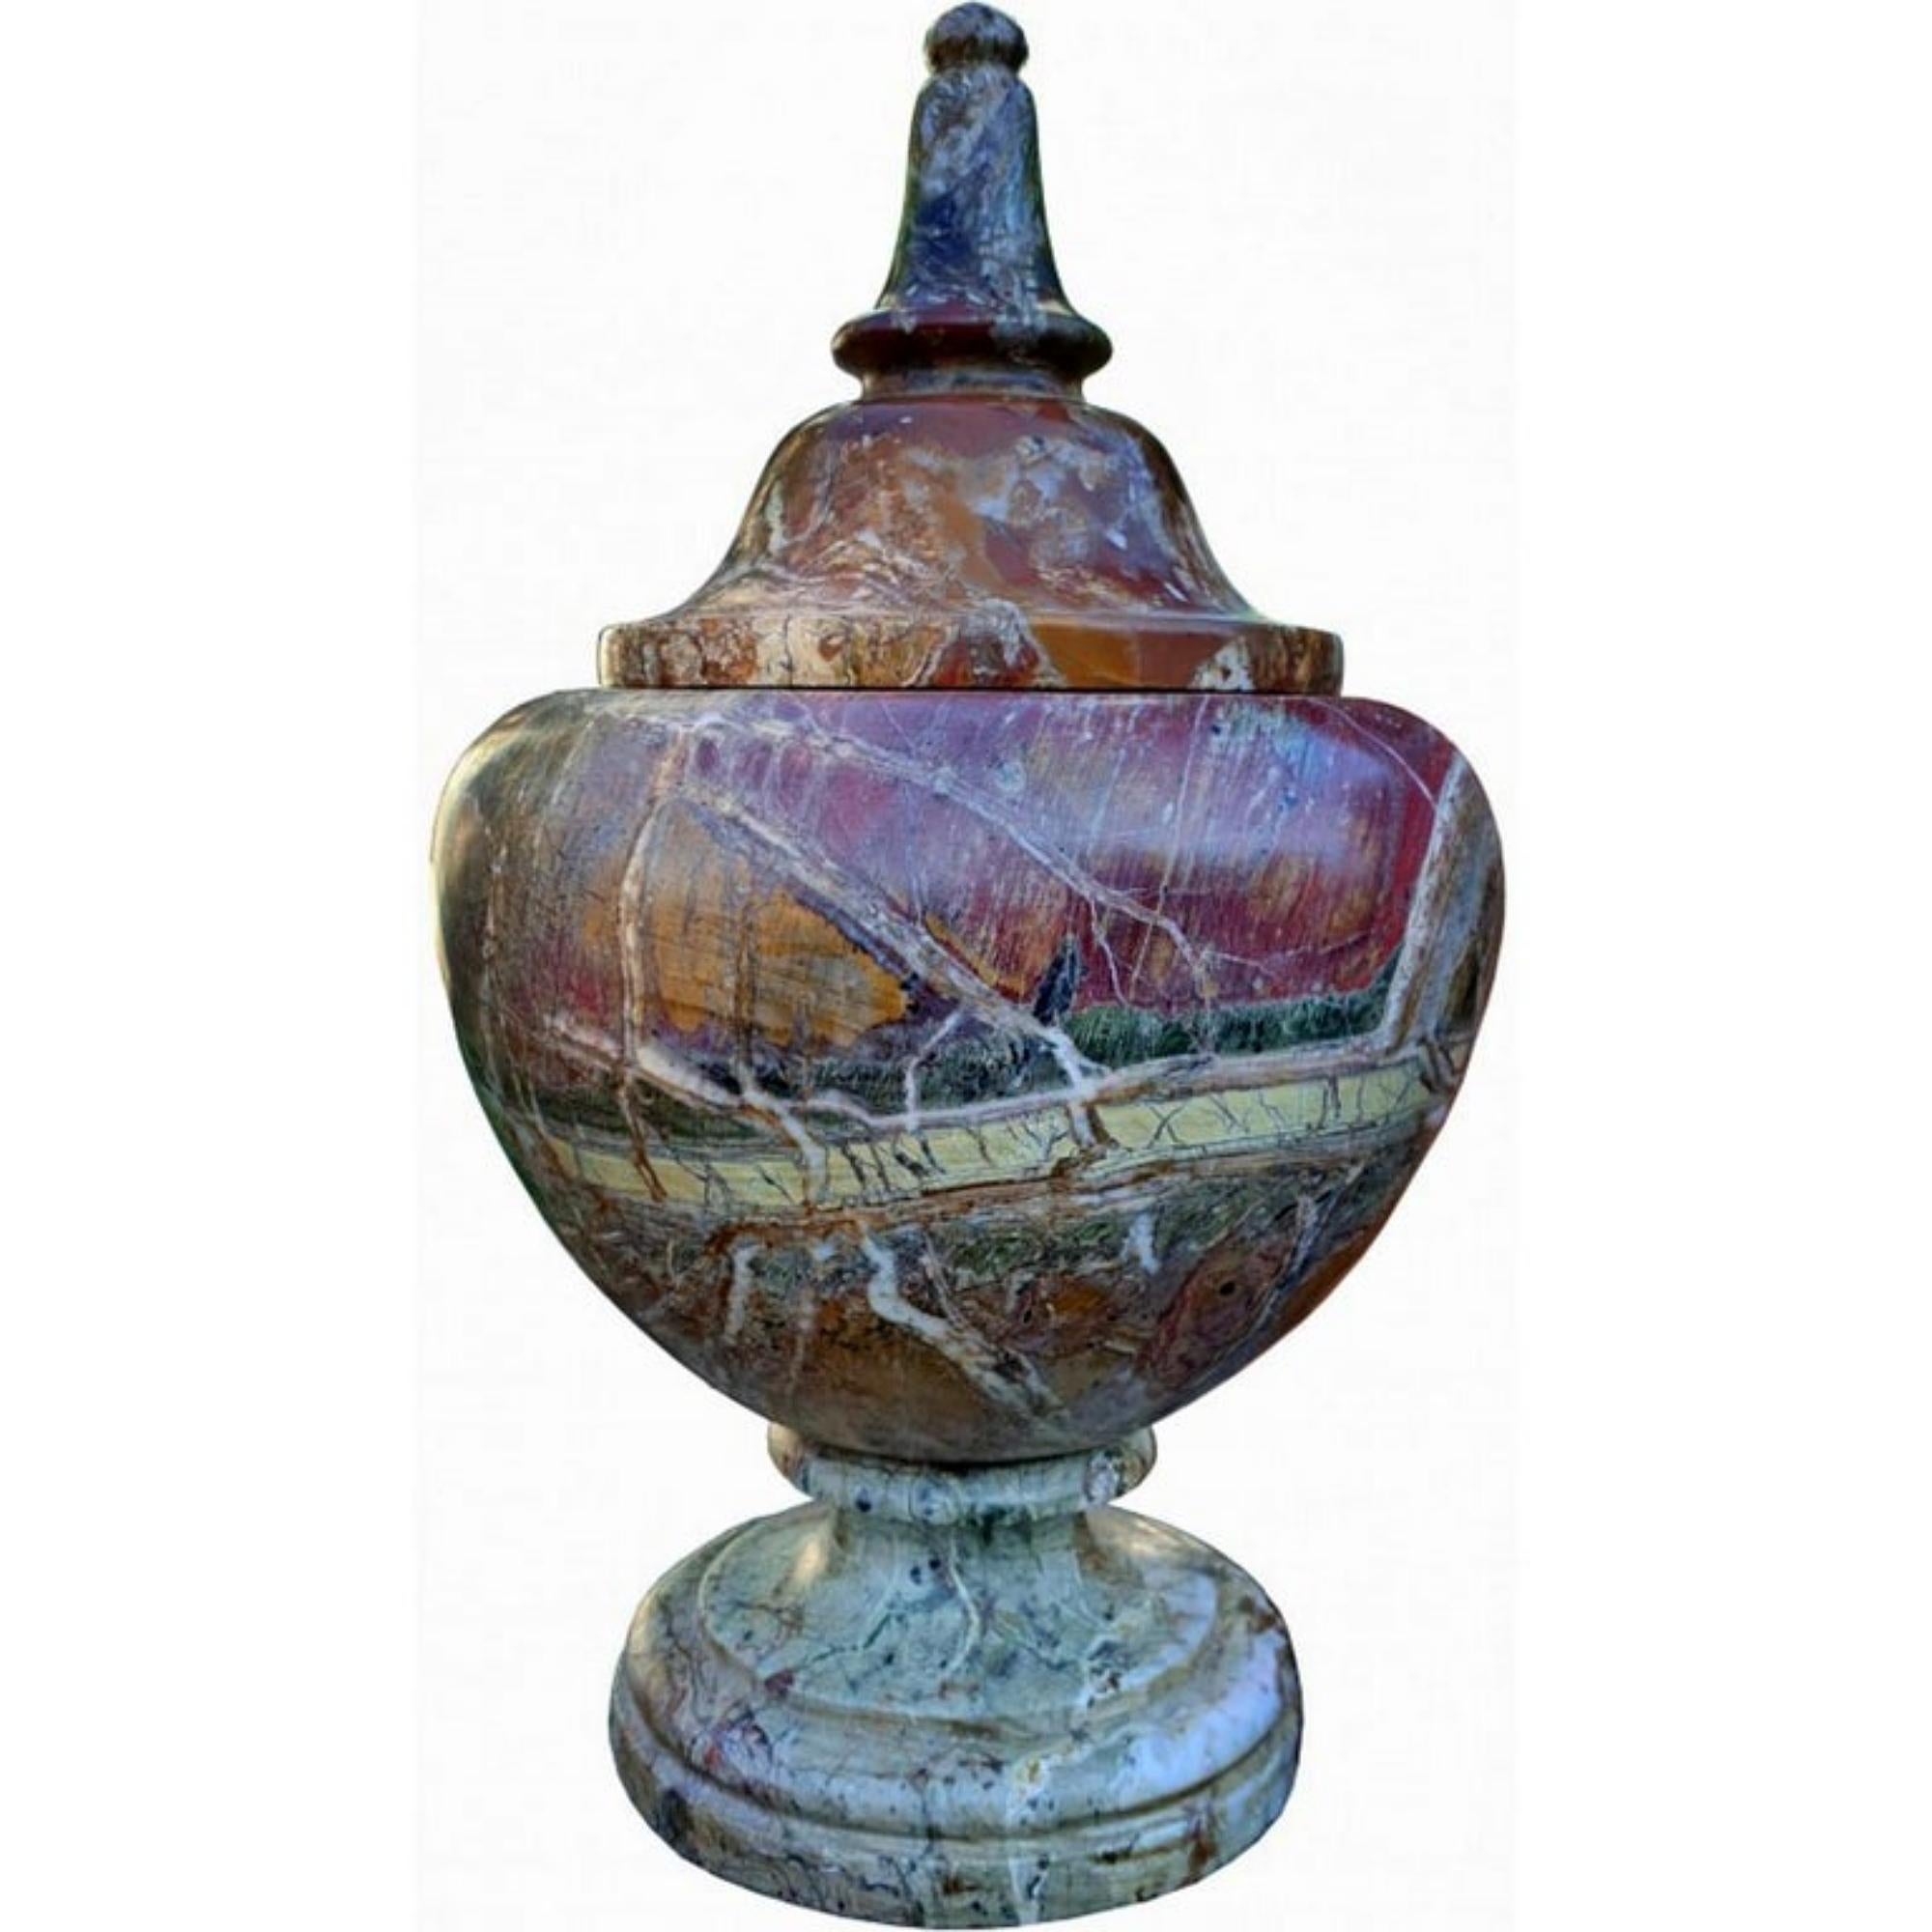 Baroque Amazing Pair of Turned Vases in Italian Diaspro Rosso Marble, Early 20th Century For Sale